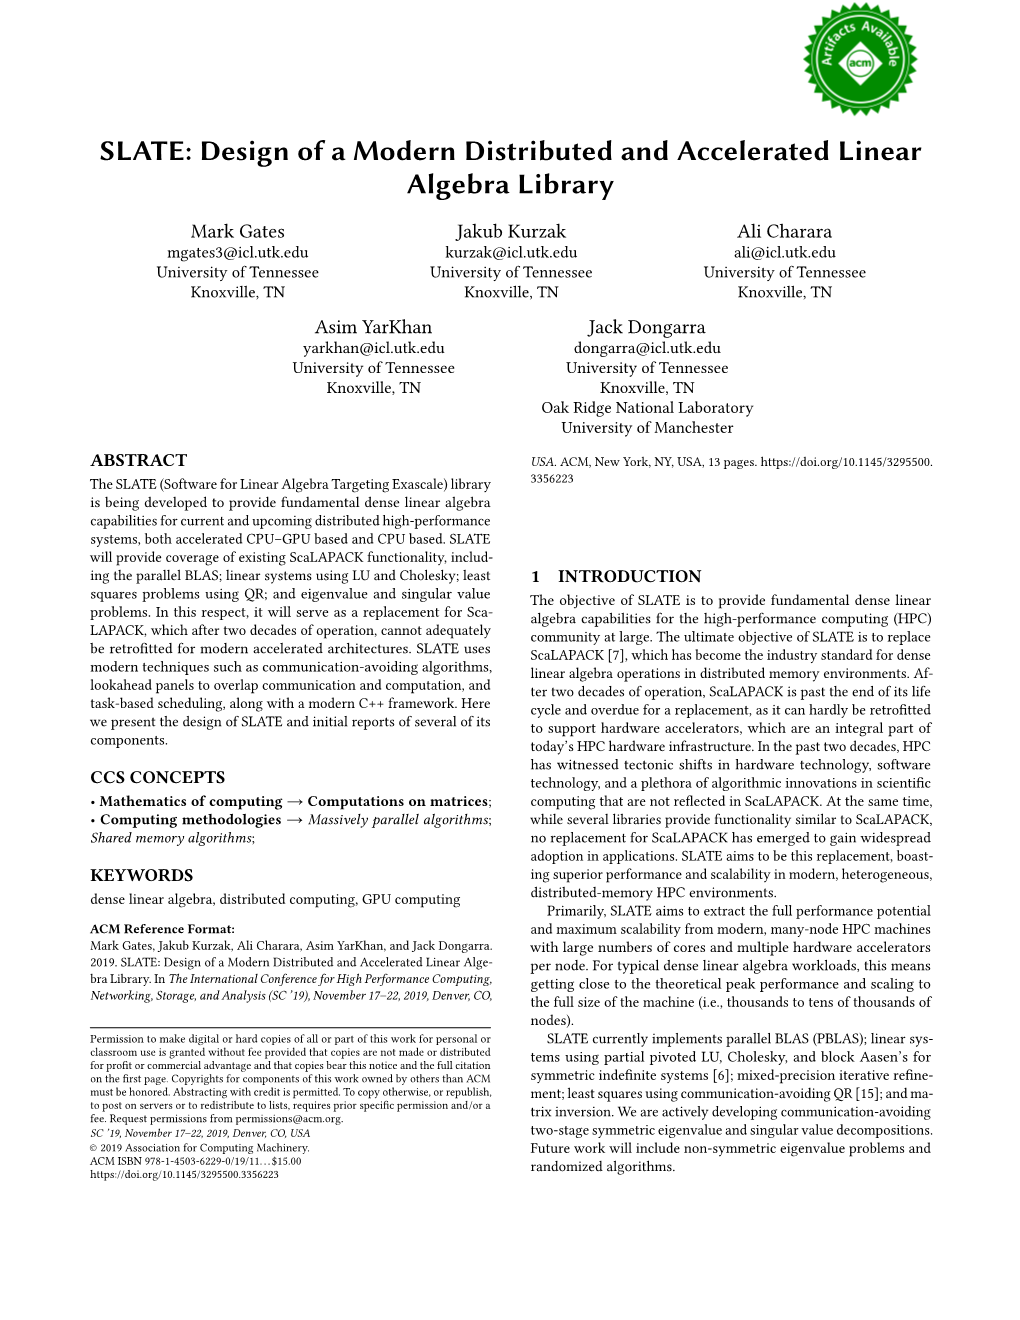 Design of a Modern Distributed and Accelerated Linear Algebra Library